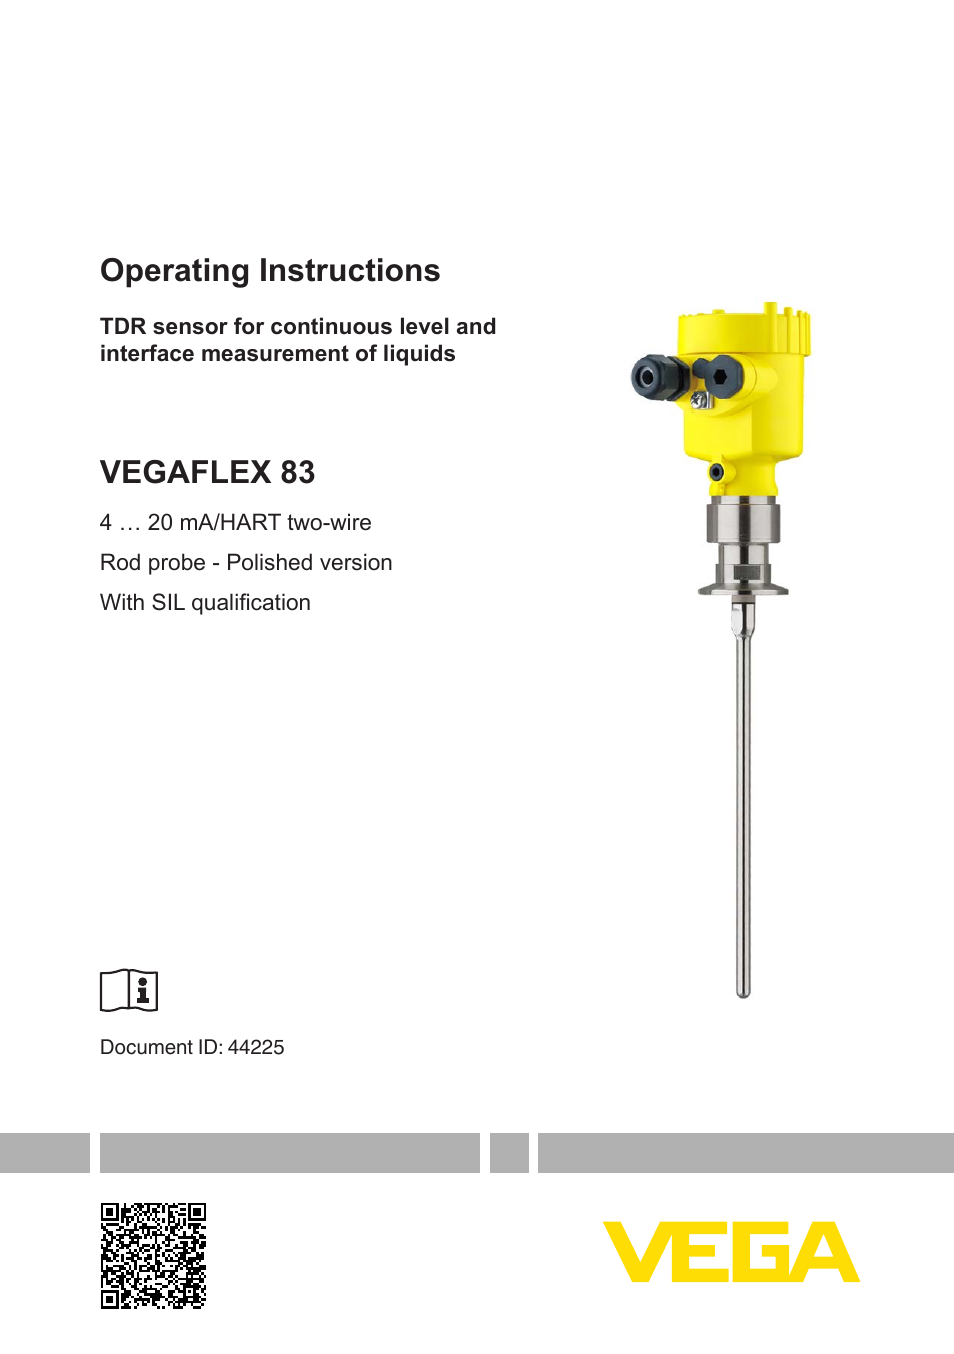 VEGAFLEX 83 4 … 20 mA_HART two-wire Rod probe - Polished version With SIL qualification